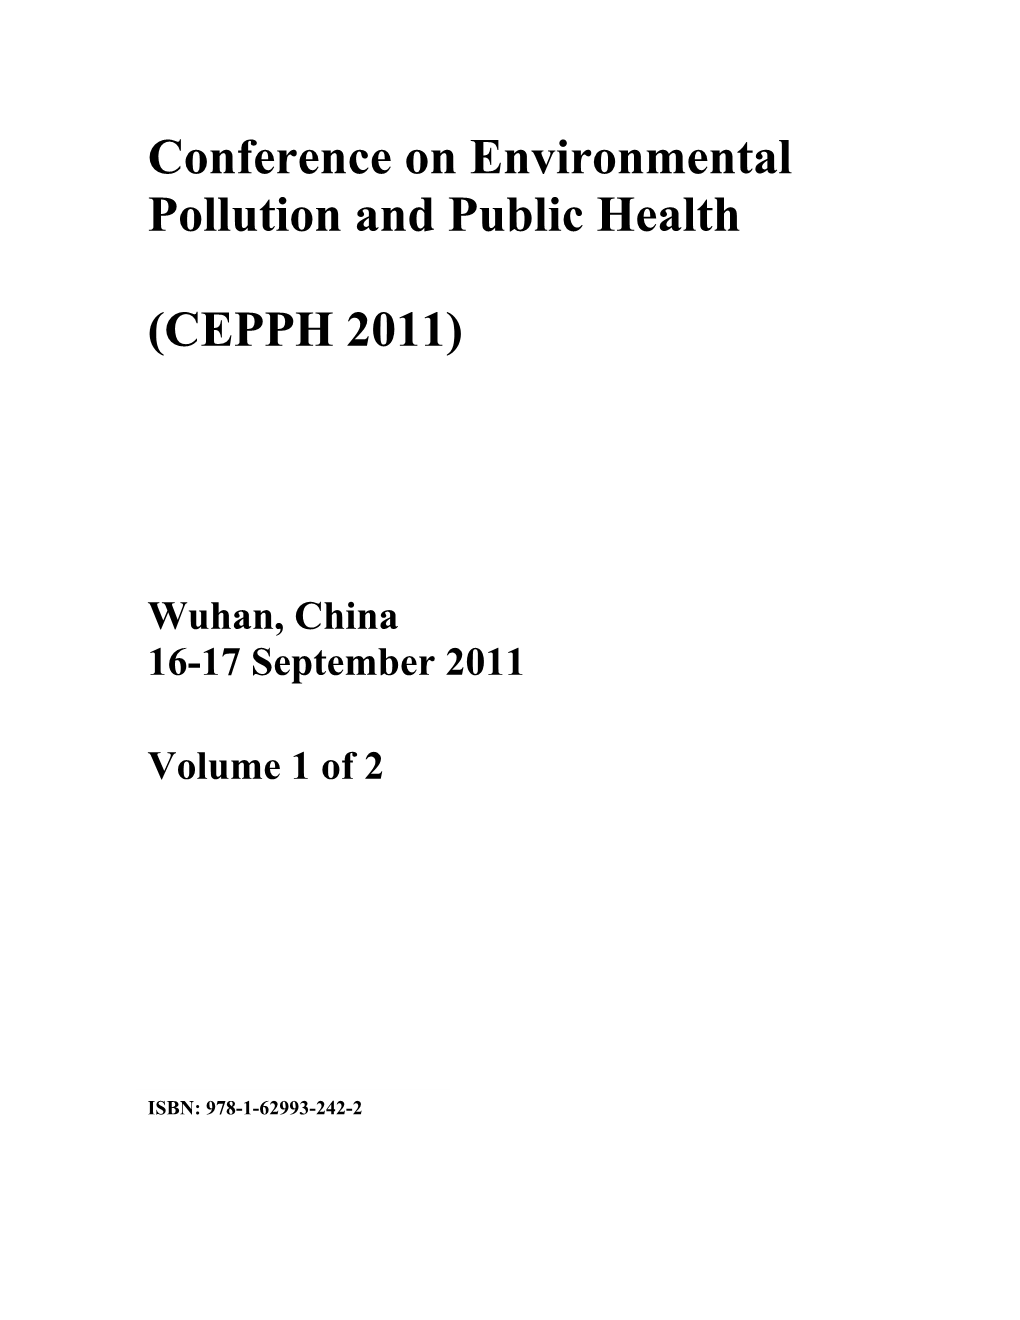 Conference on Environmental Pollution and Public Health